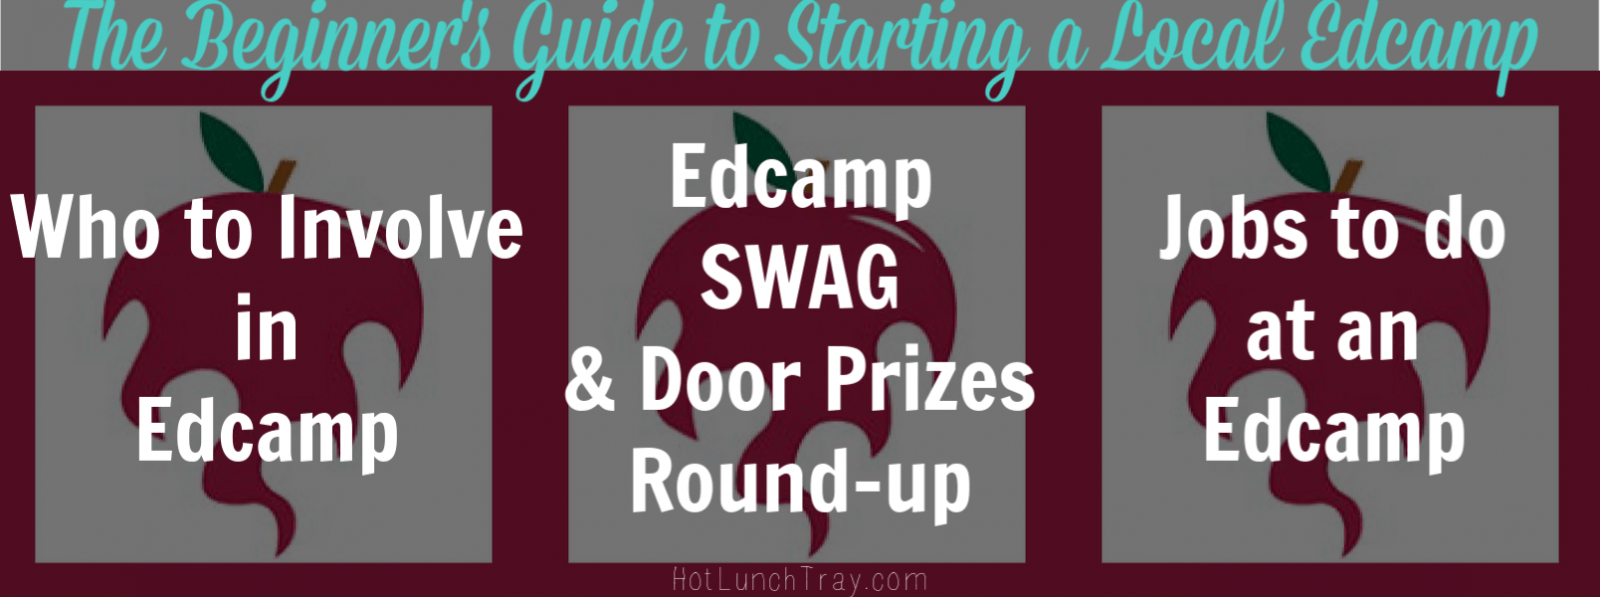 The Beginners Guide to Starting a Local Edcamp BANNER